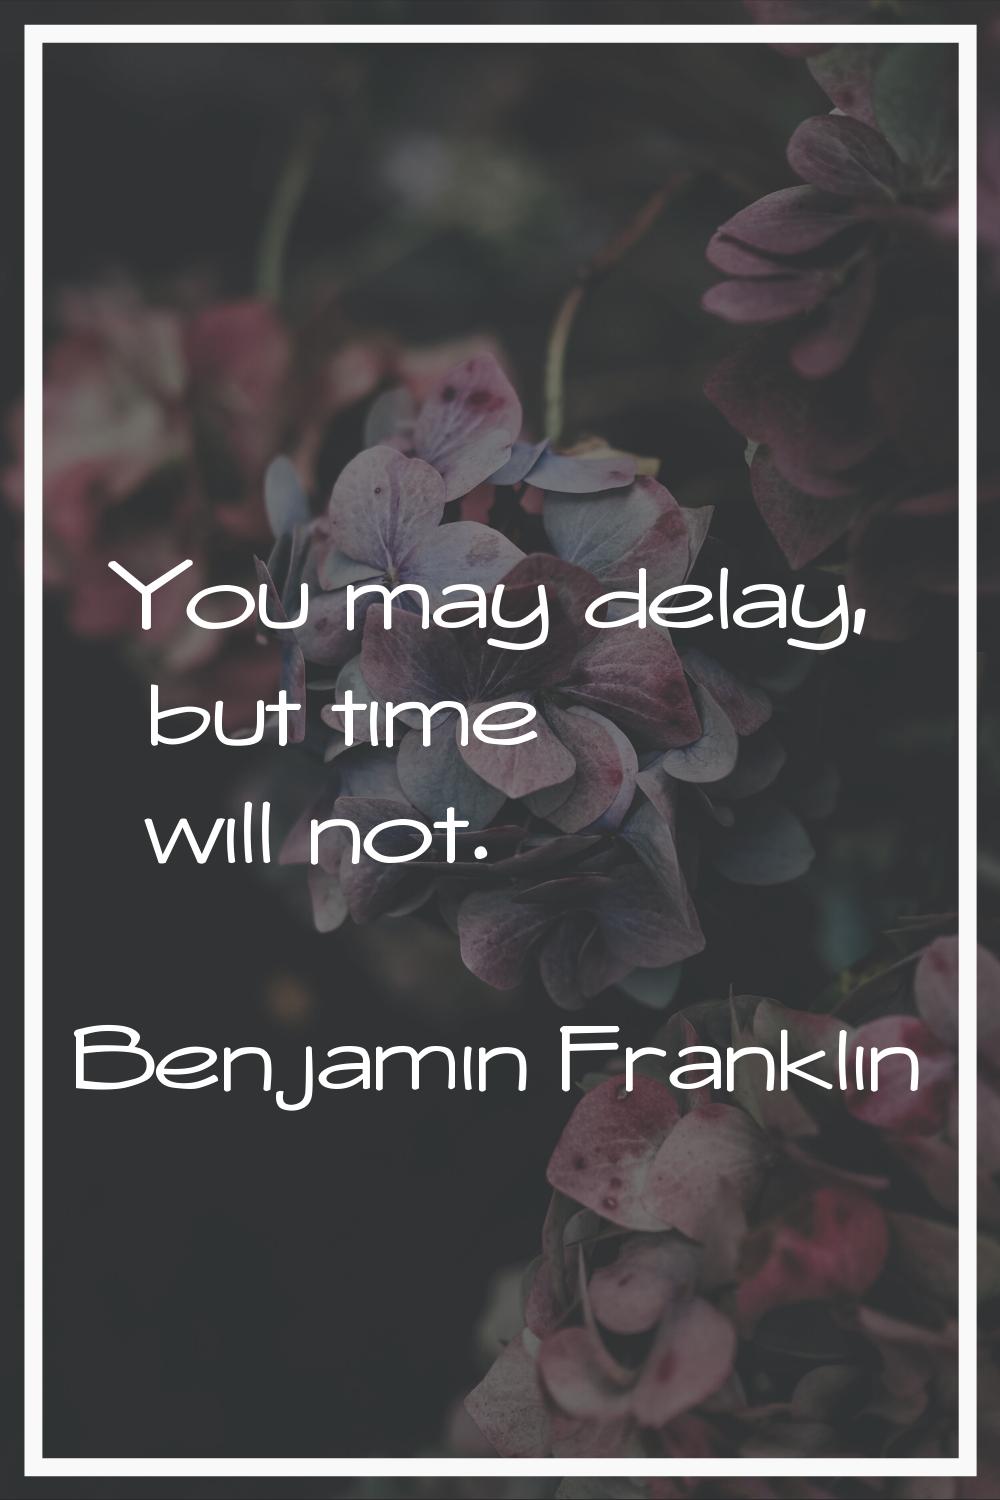 You may delay, but time will not.